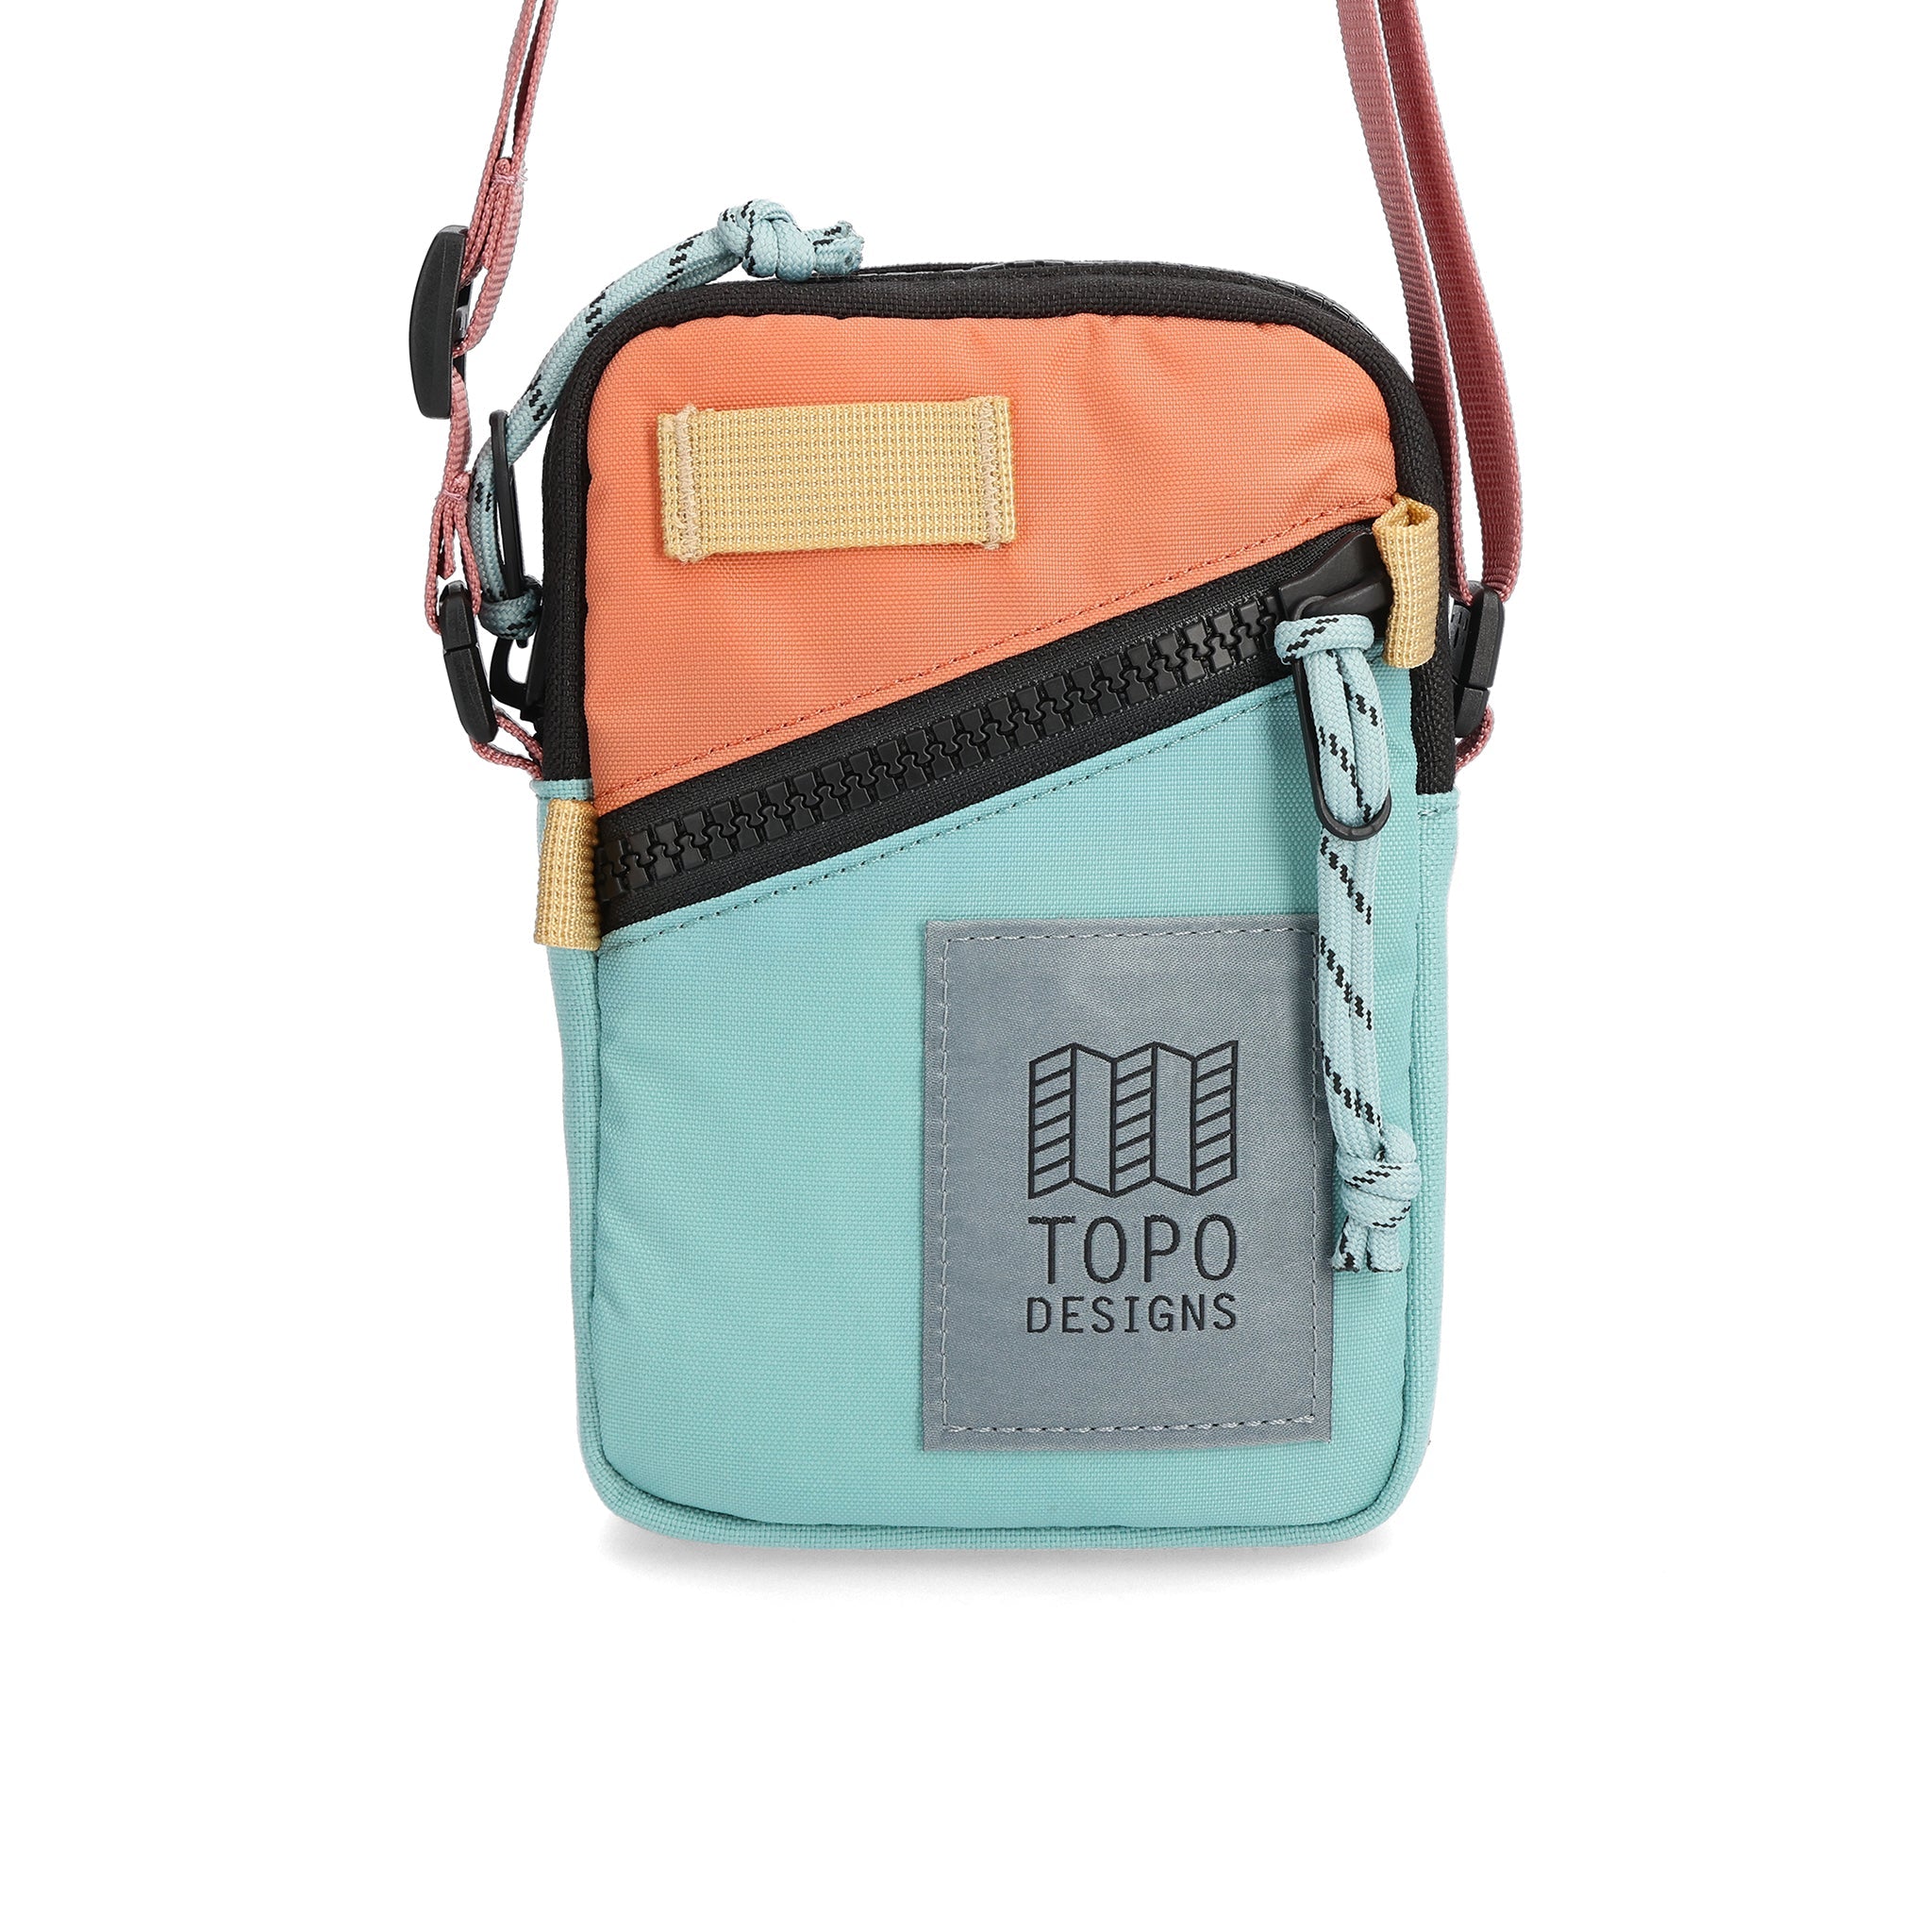 Front View of Topo Designs Mini Shoulder Bag in "Rose / Geode Green"